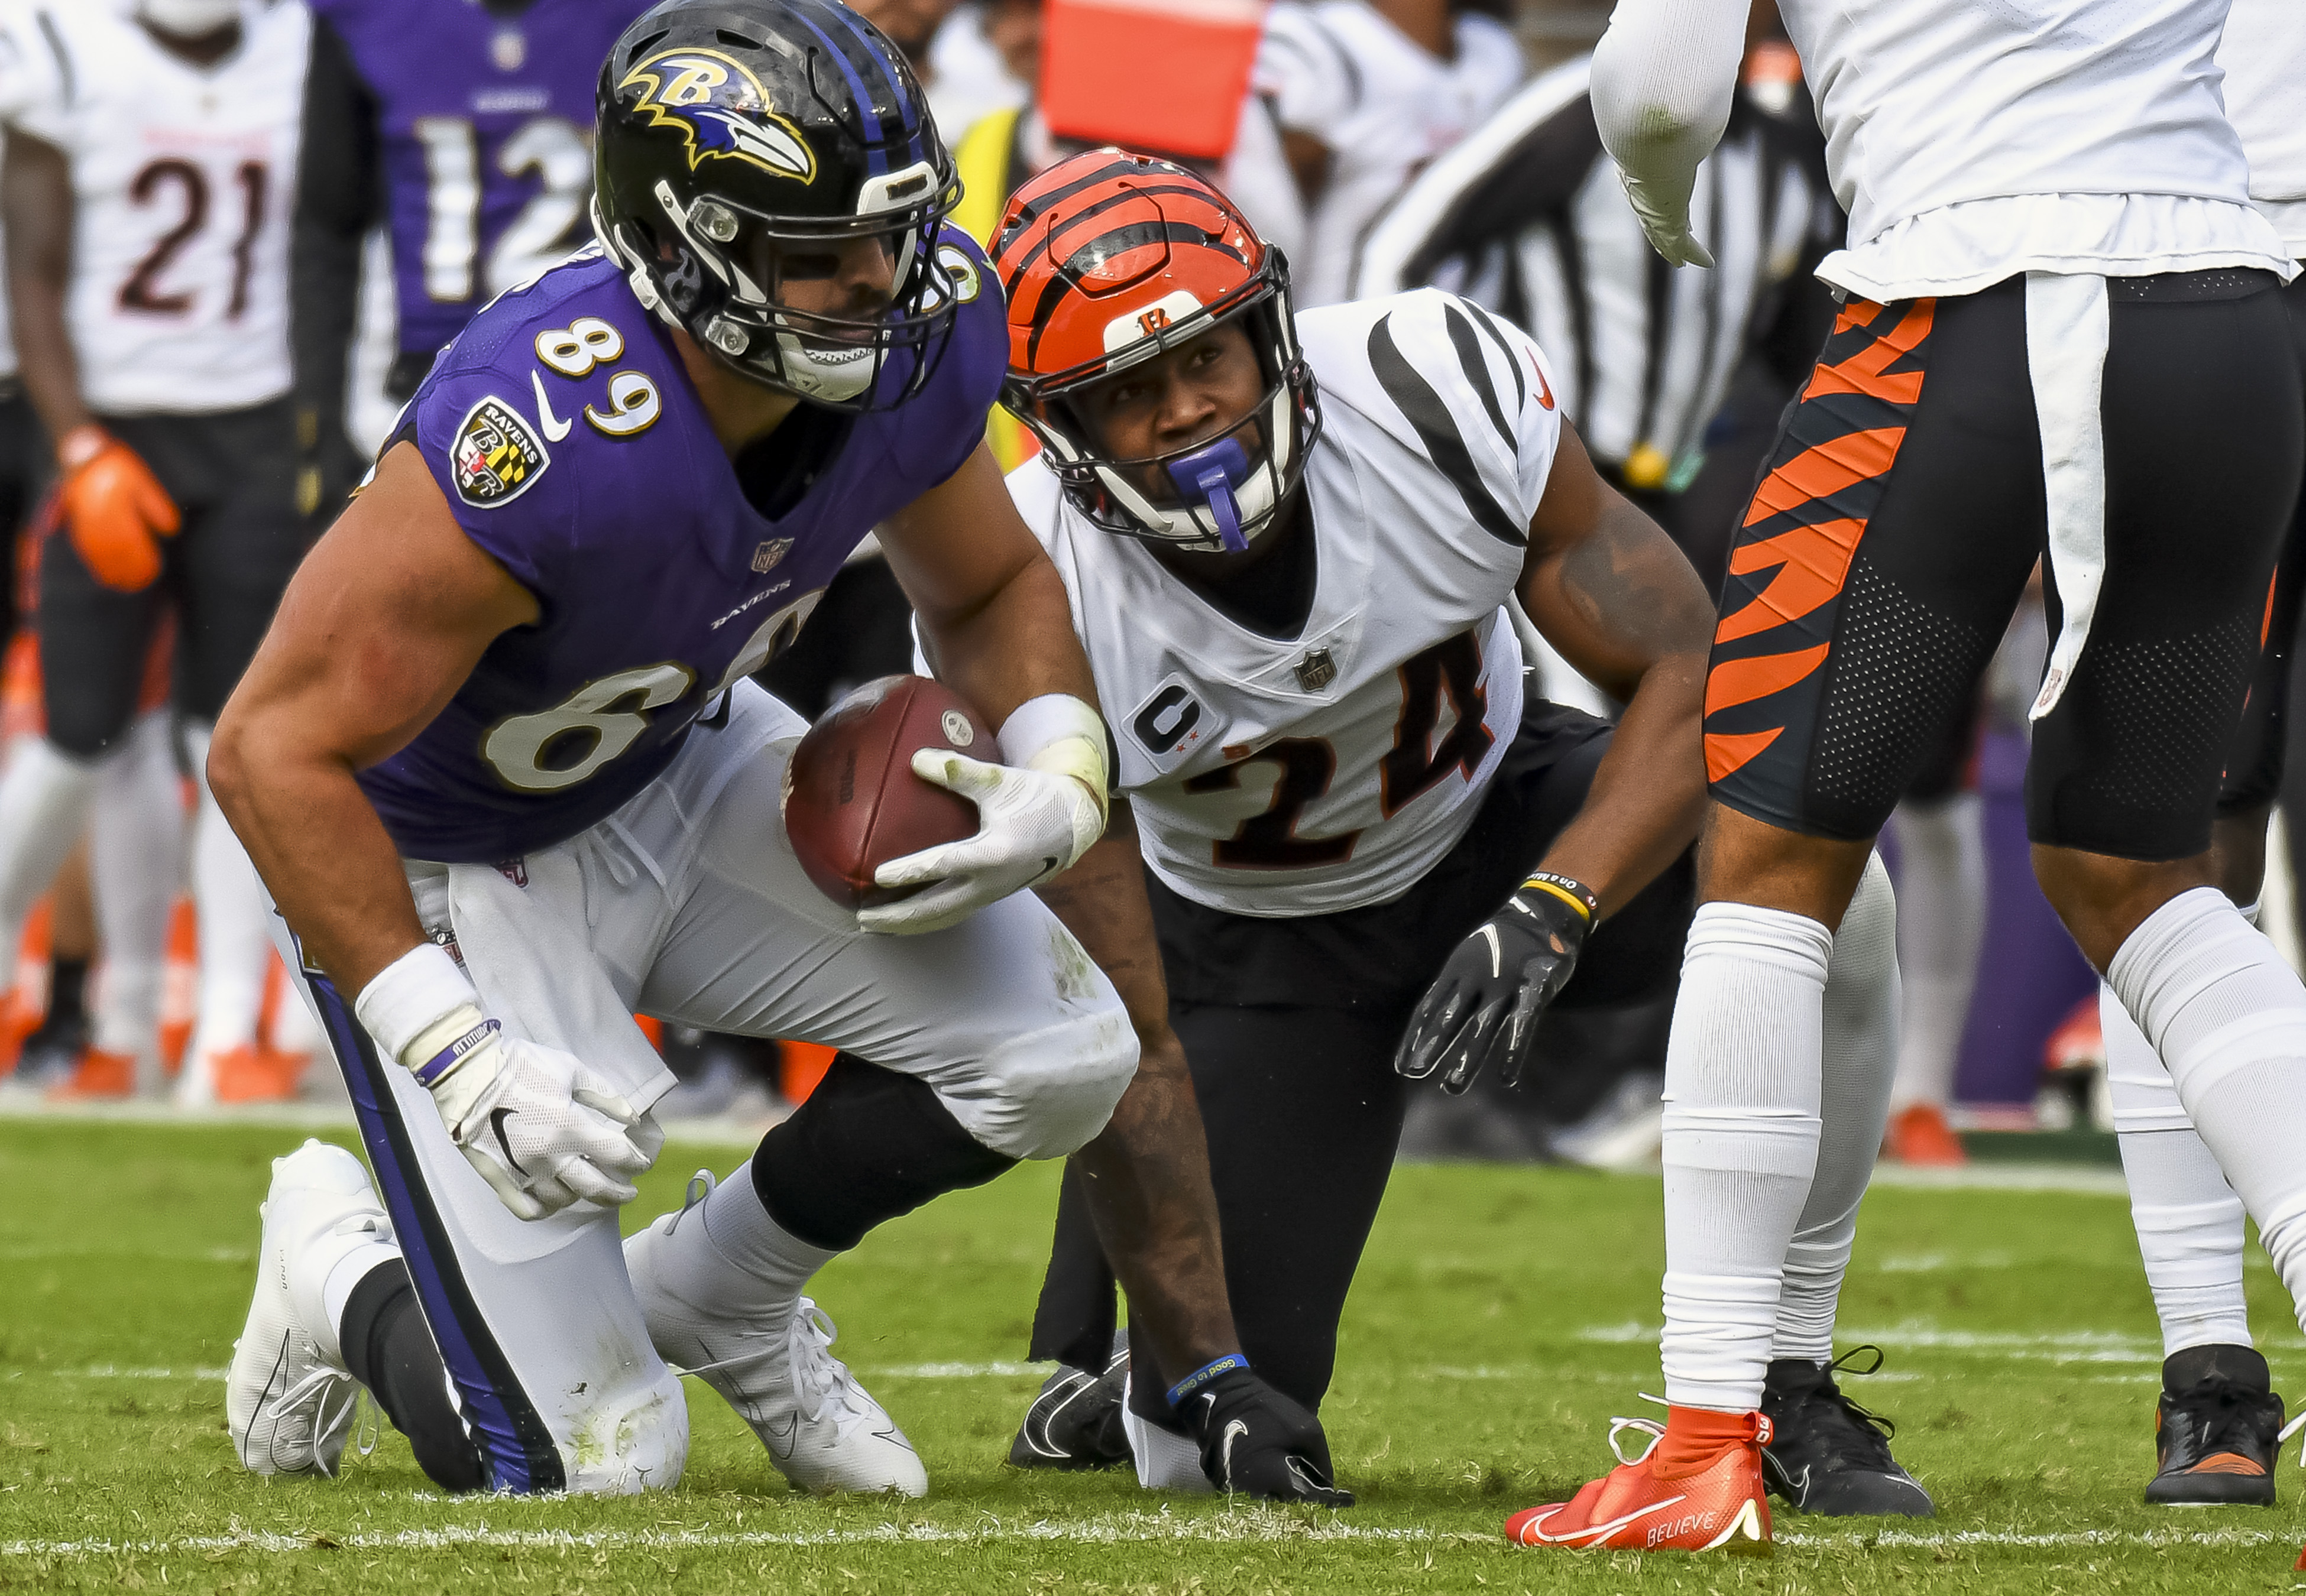 The Bengals and Ravens square off Sunday in a critical AFC North contest